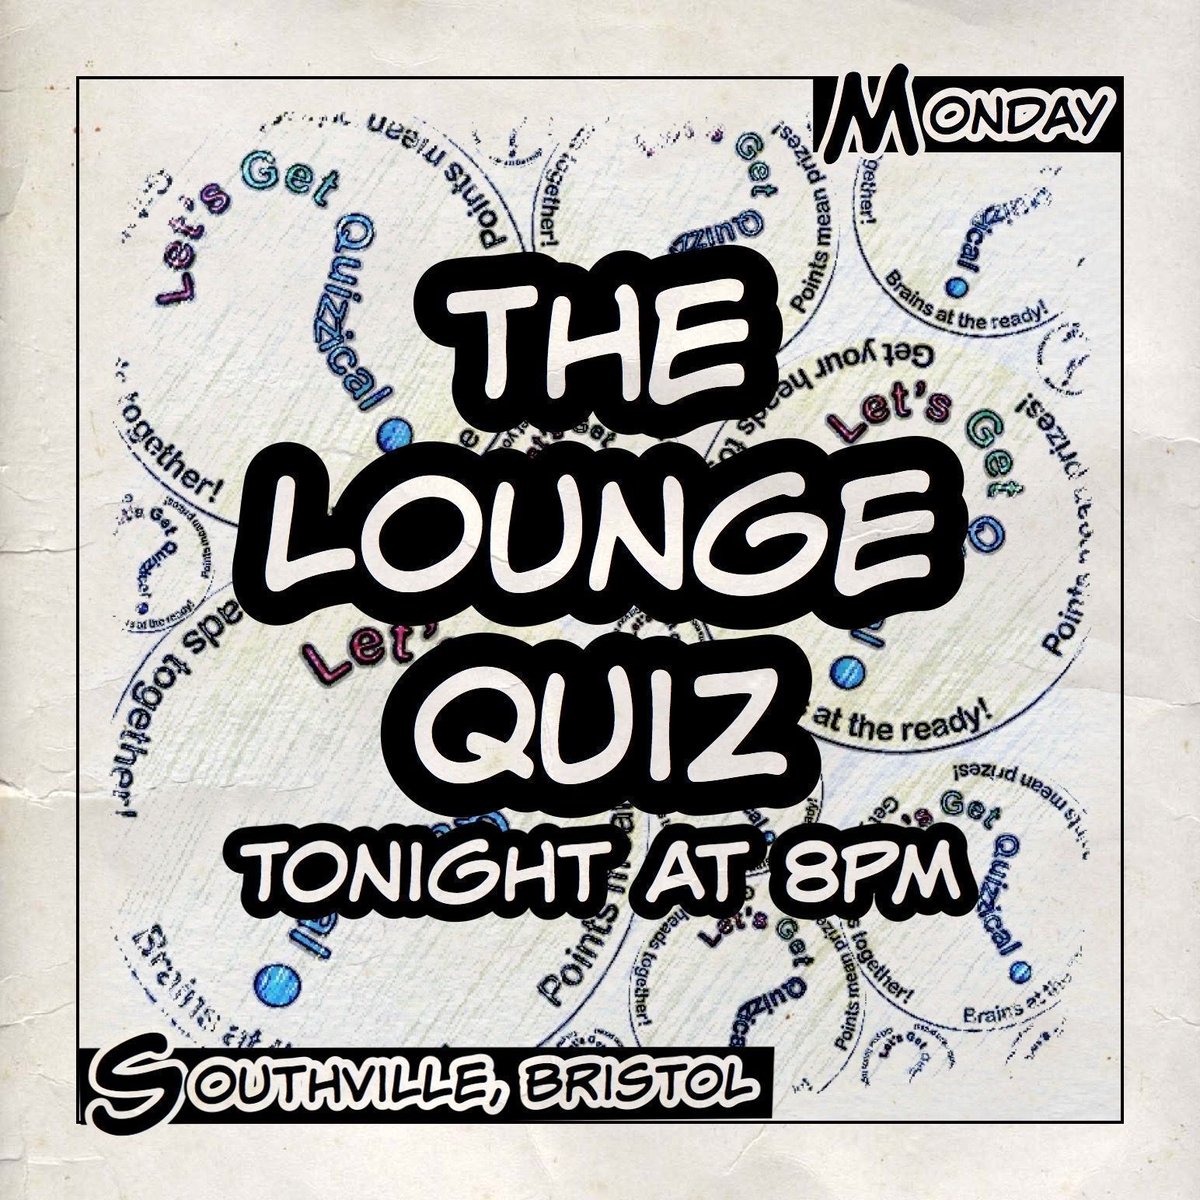 It’s #QuizNight at #TheLounge in #BS3, #Southville, #Bristol. 8pm start for our #GeneralKnowledge #Quiz with cash and vouchers to be won